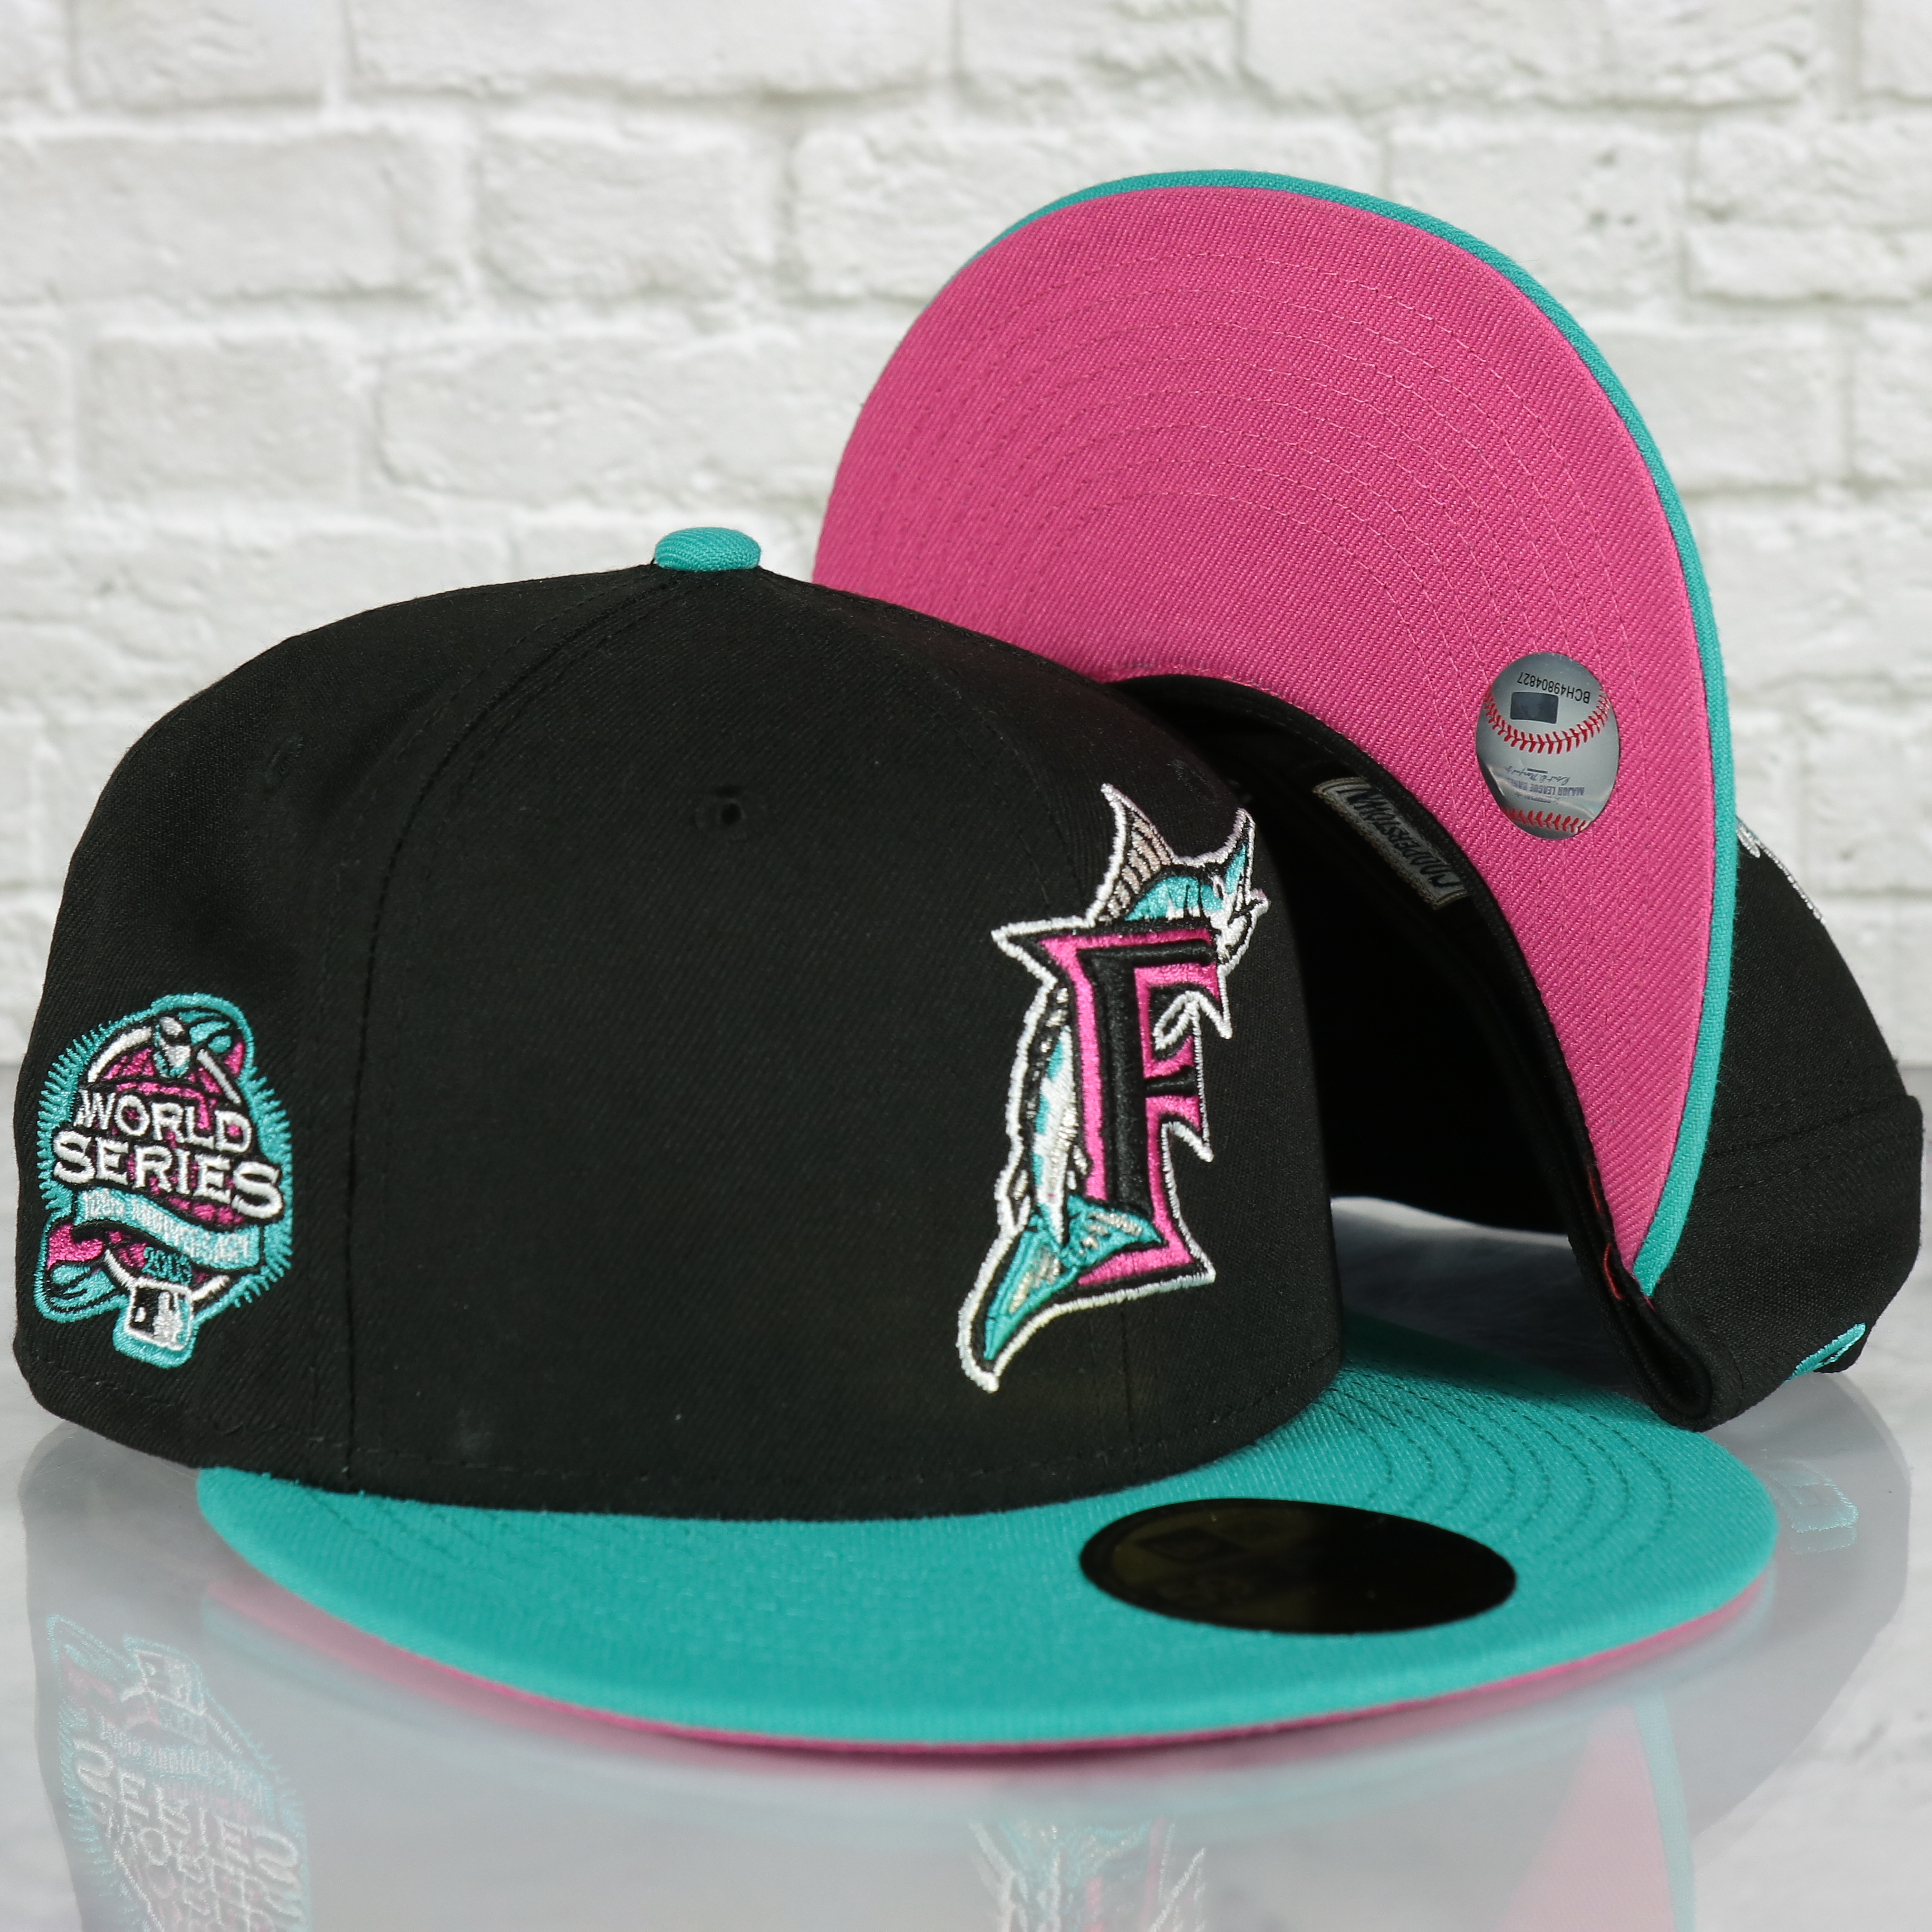 New Era 59FIFTY Miami Marlins 2003 World Series Champions Patch Hat - White, Teal, Orange 7 1/4